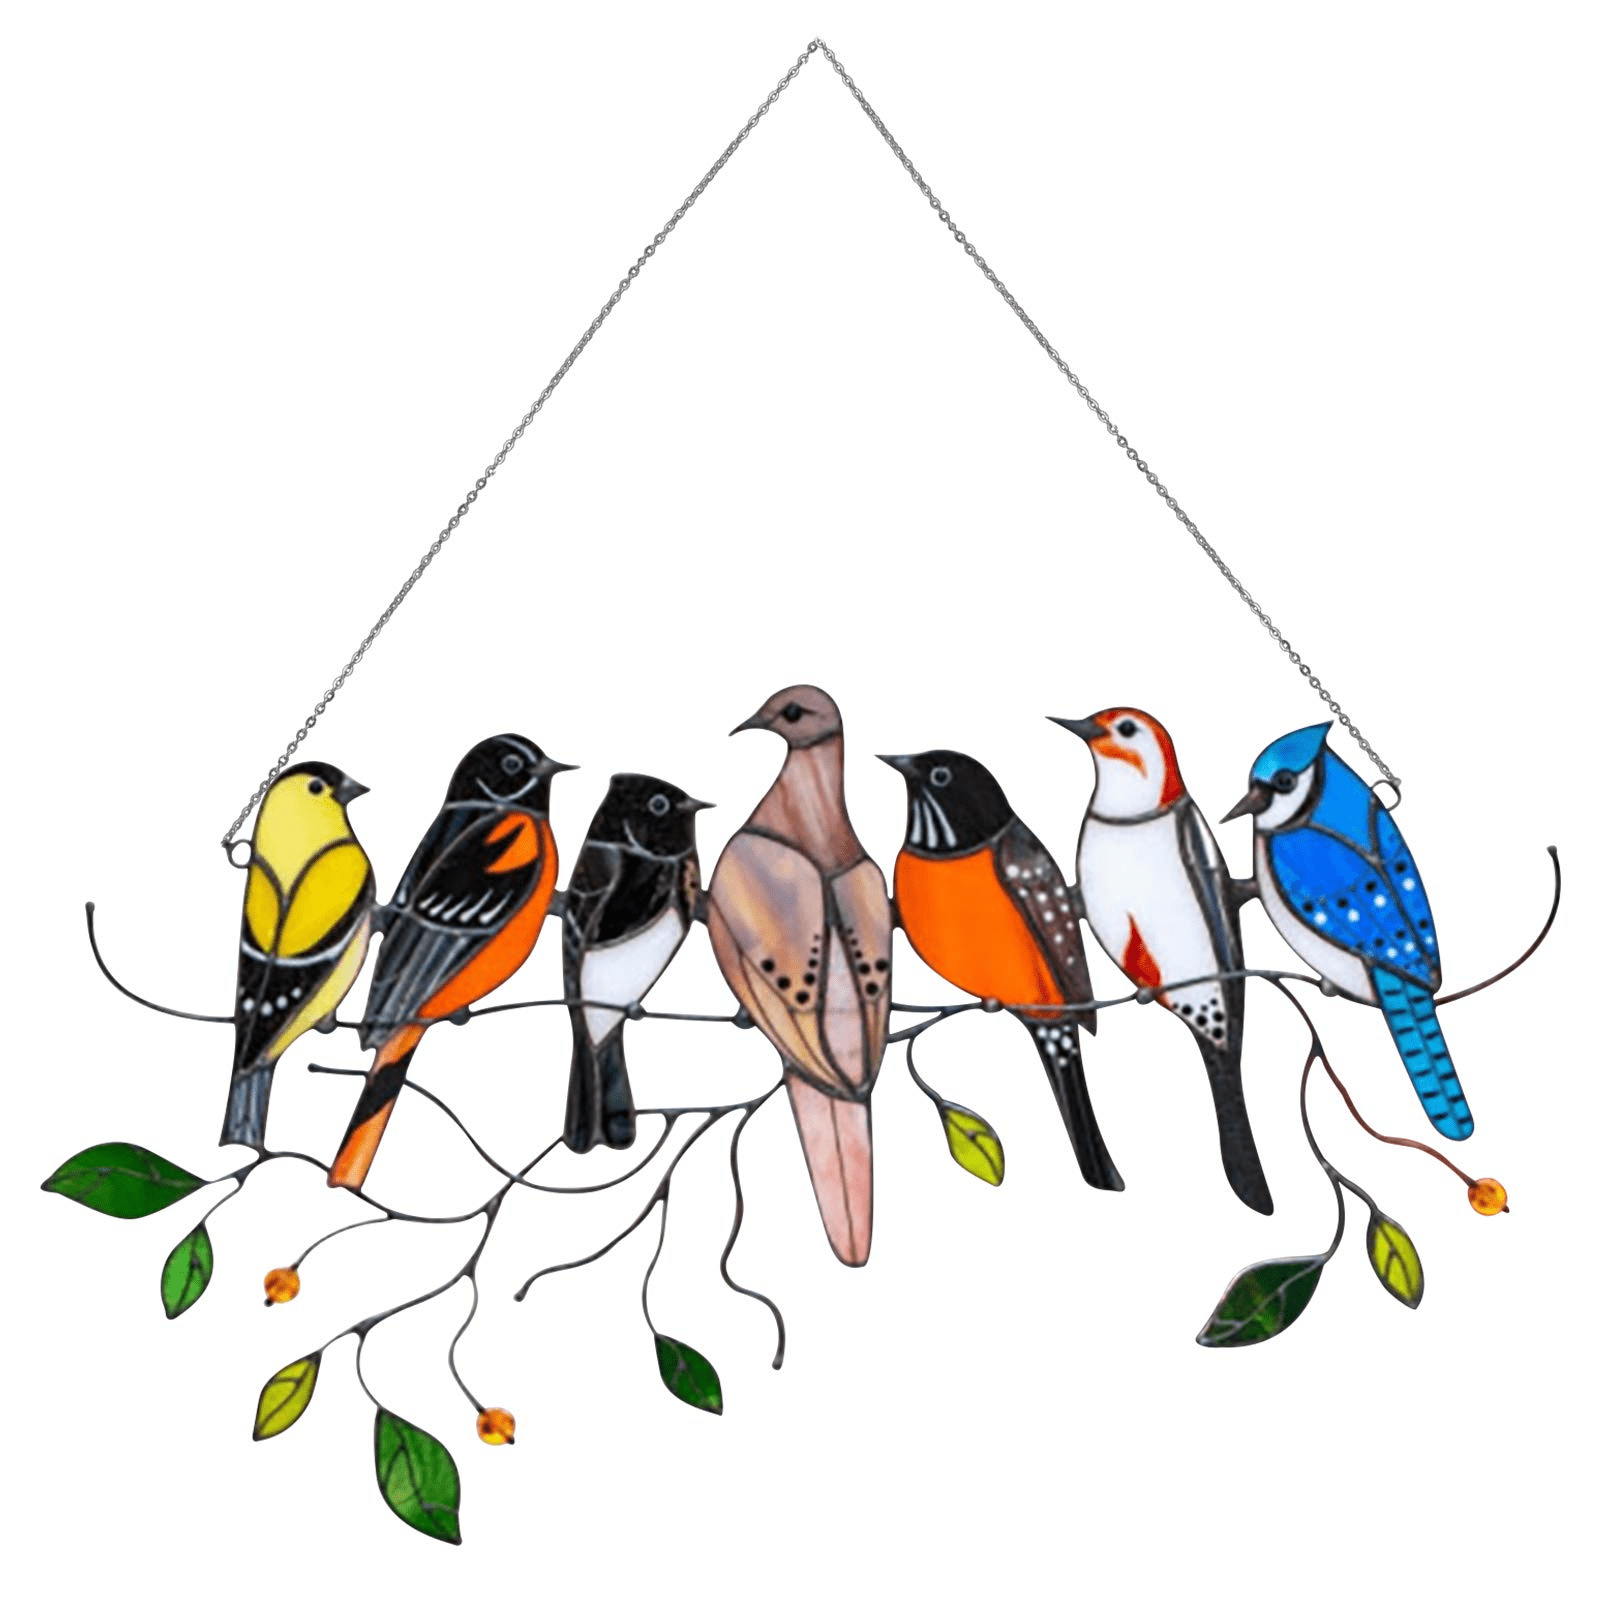 Ornament Memorial Handicrafts Gifts Hanging for Windows Doors Acrylic-4 Birds Window Stained Panel Decoration SHUAIGUO Birds on a Wire Stained Glass Window Hangings Ornament Home Decor